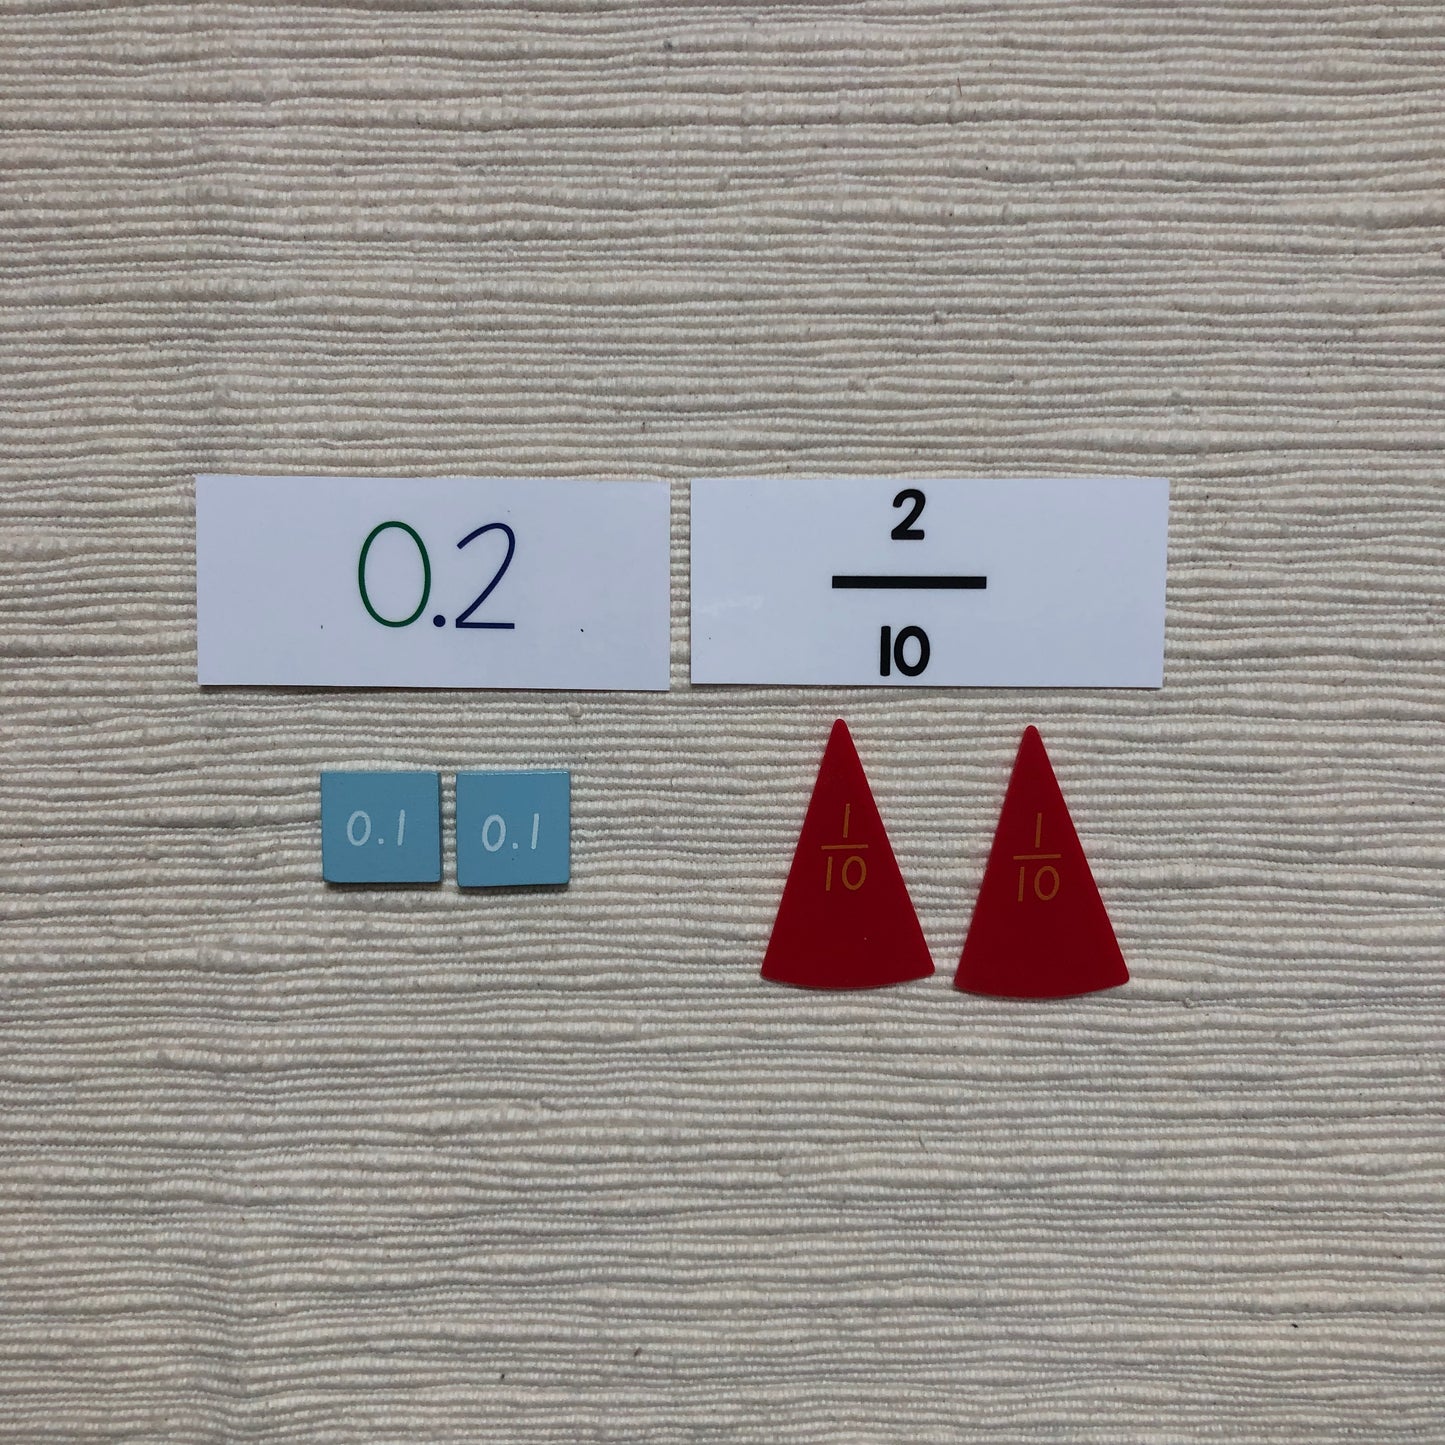 Comparing fractions to decimals match up - montessorikiwi